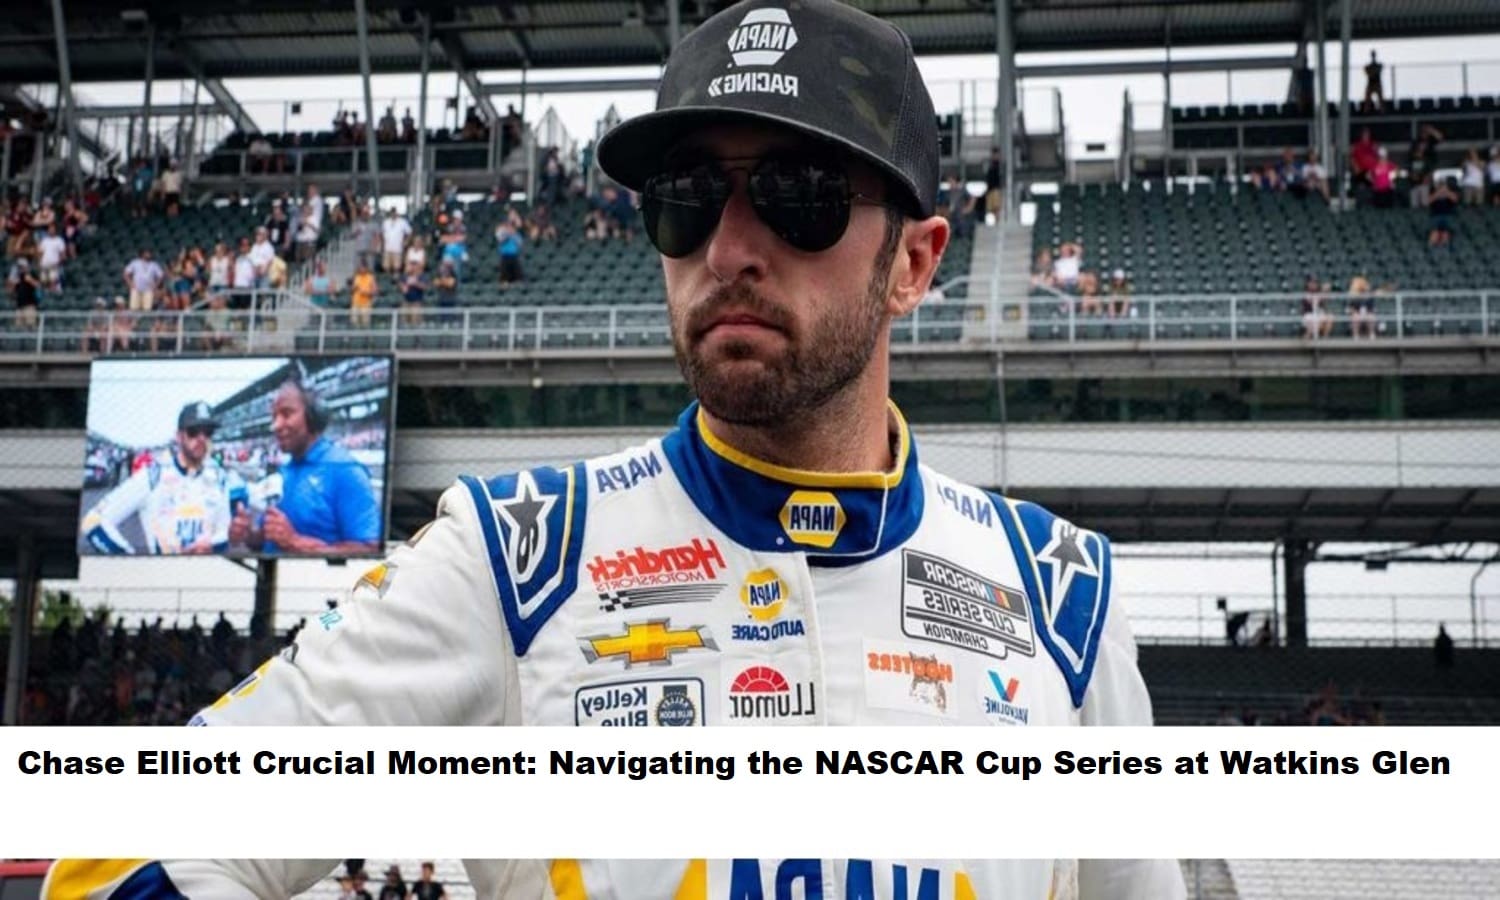 chase-elliott-crucial-moment-navigating-the-nascar-cup-series-at-watkins-glen